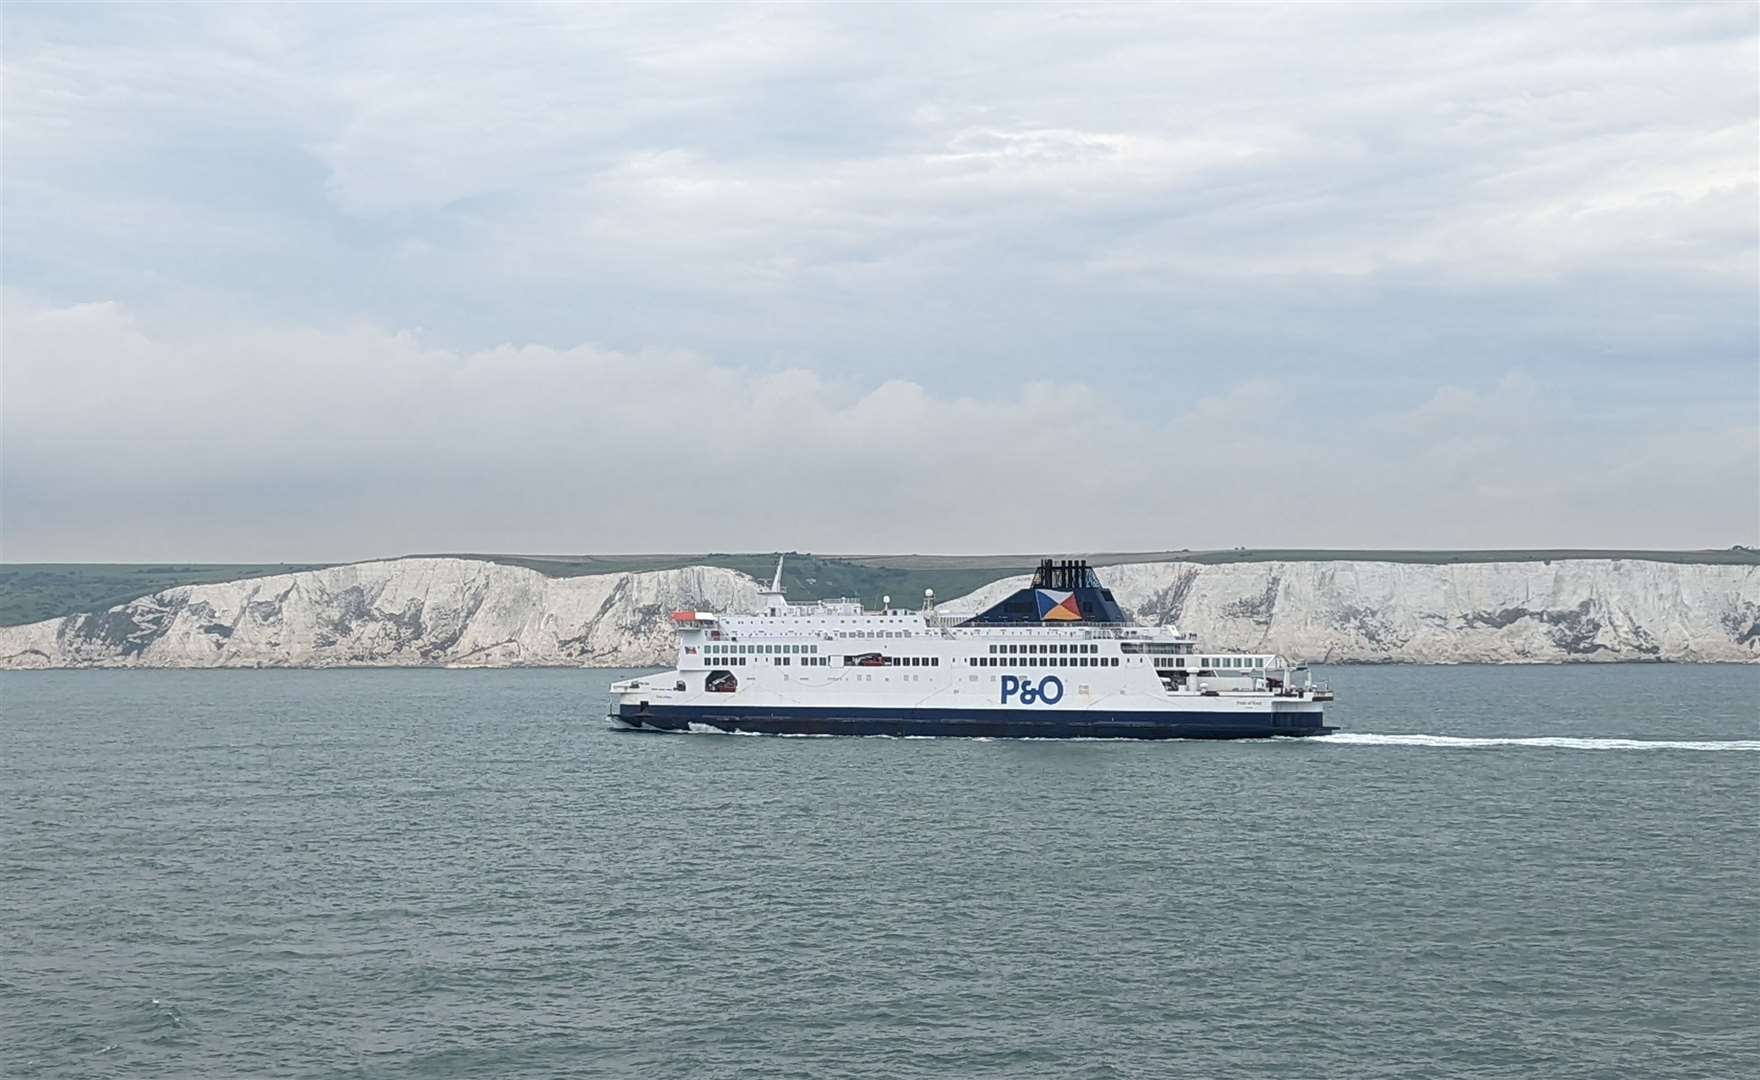 P&O Ferries has replaced crews with cheaper agency workers